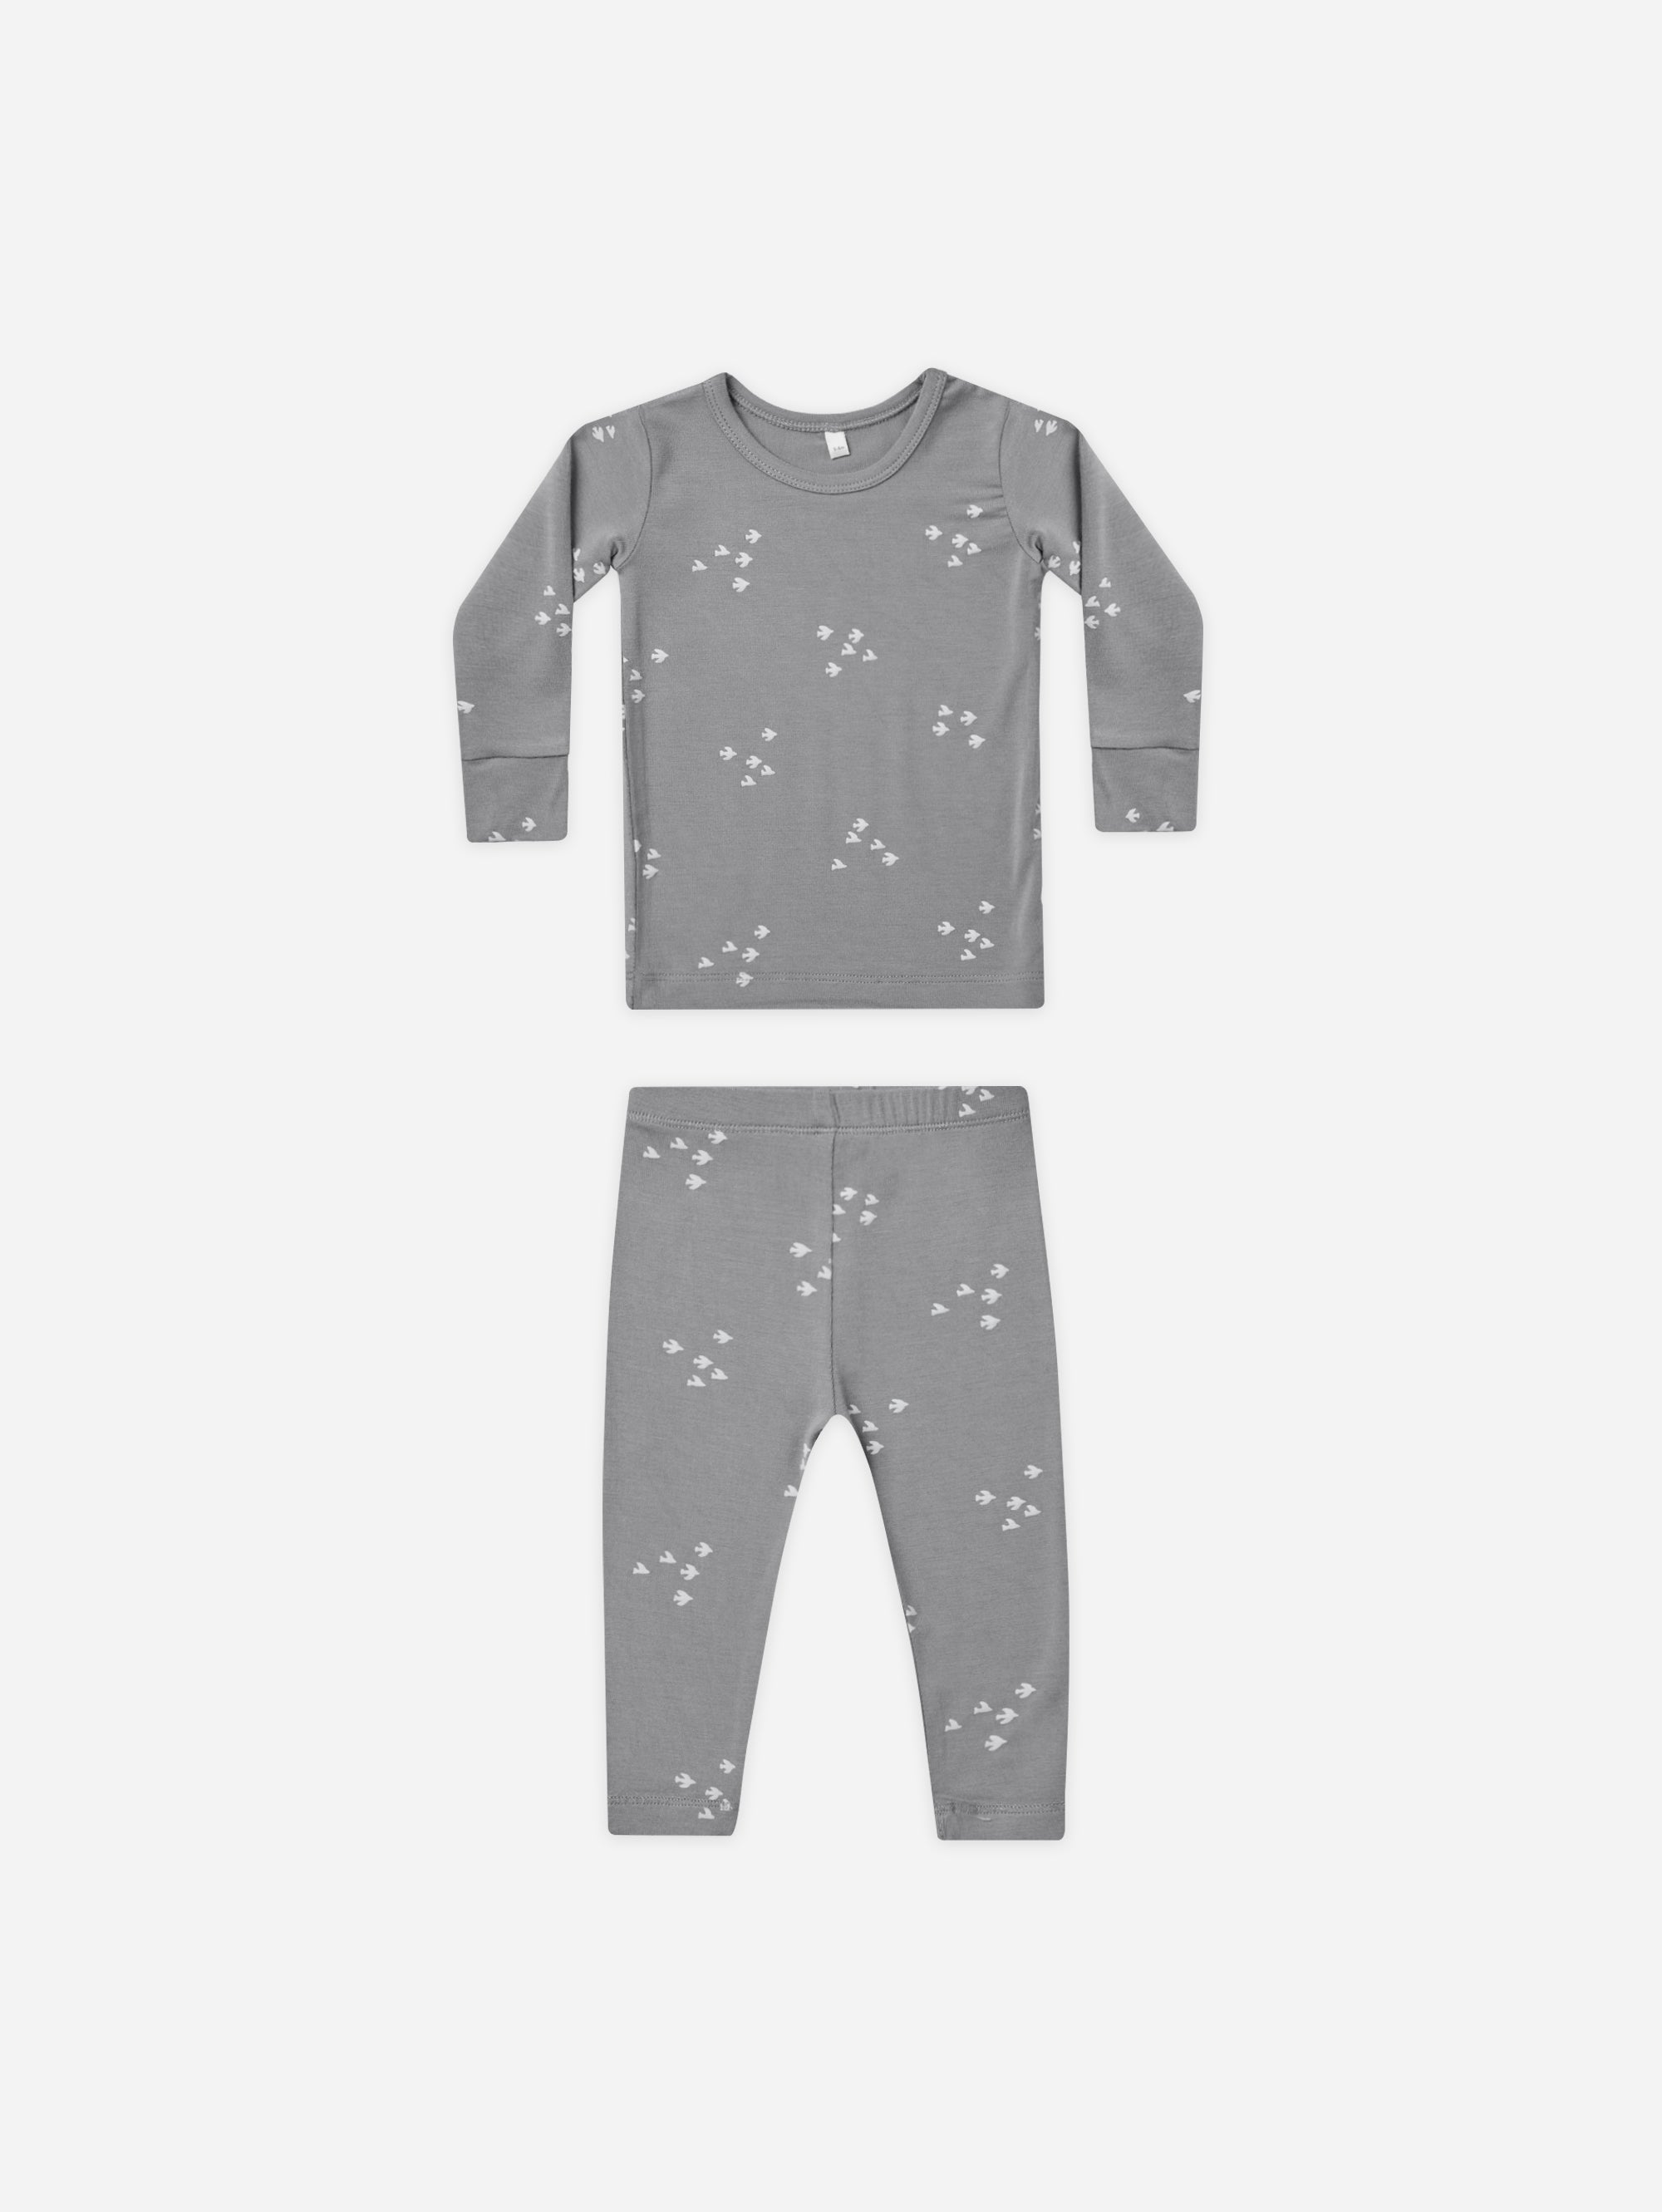 Bamboo Long Sleeve Pajama Set || Flock - Rylee + Cru | Kids Clothes | Trendy Baby Clothes | Modern Infant Outfits |